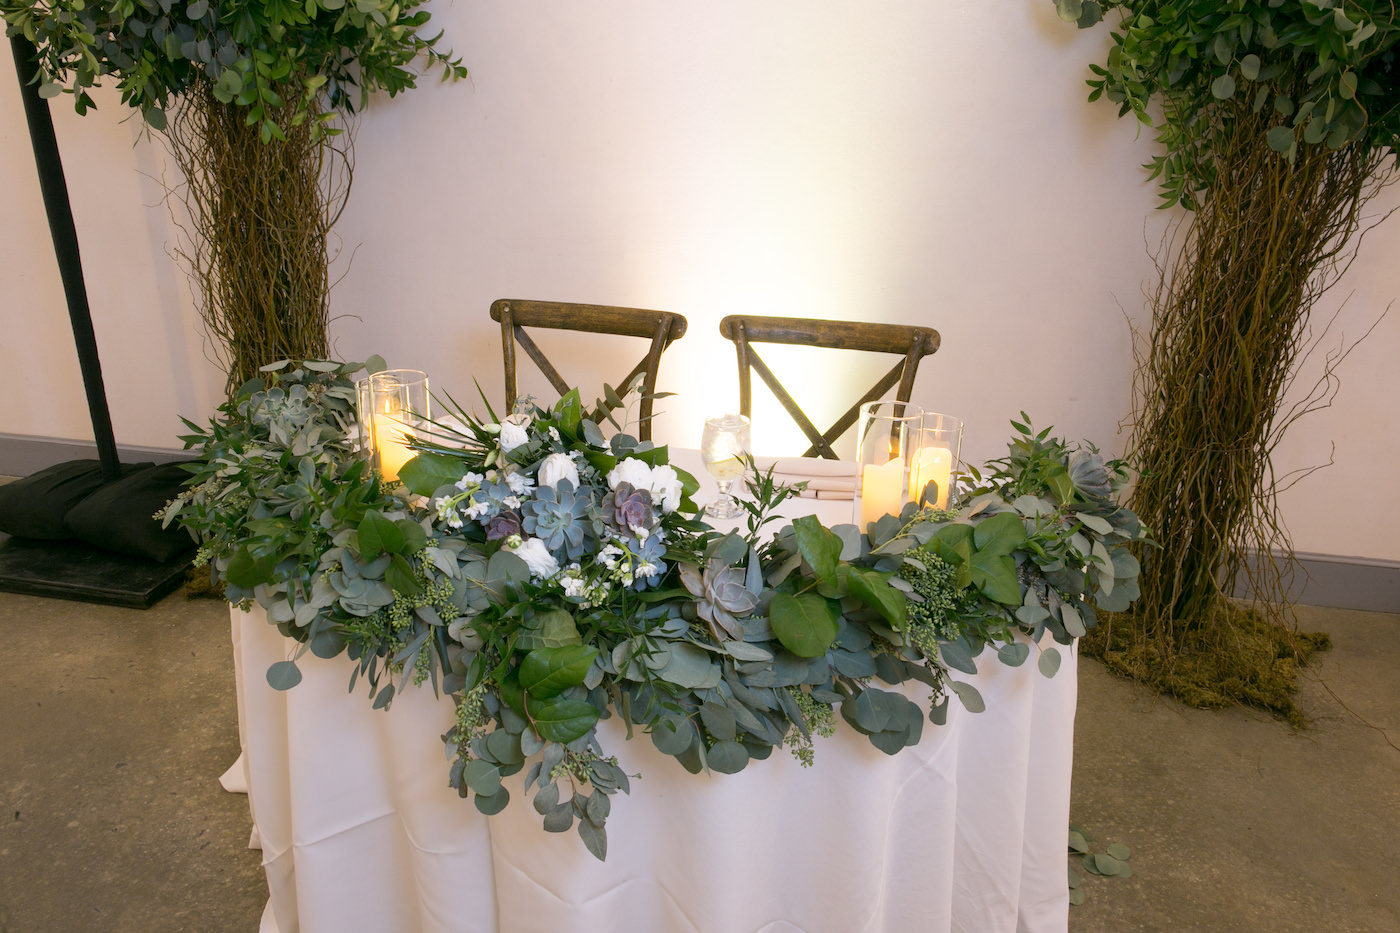 Wes Anderson Inspired Wedding Reception Decor, Eucalyptus, Succulents, White Roses, Greenery Garland on Sweetheart Table with White Linen, Wooden Cross back Chairs, Curly Willow Trees | Wedding Photographer Carrie Wildes Photography | Tampa Bay Wedding Florist Monarch Events and Design | Wedding Planner UNIQUE Weddings and Events